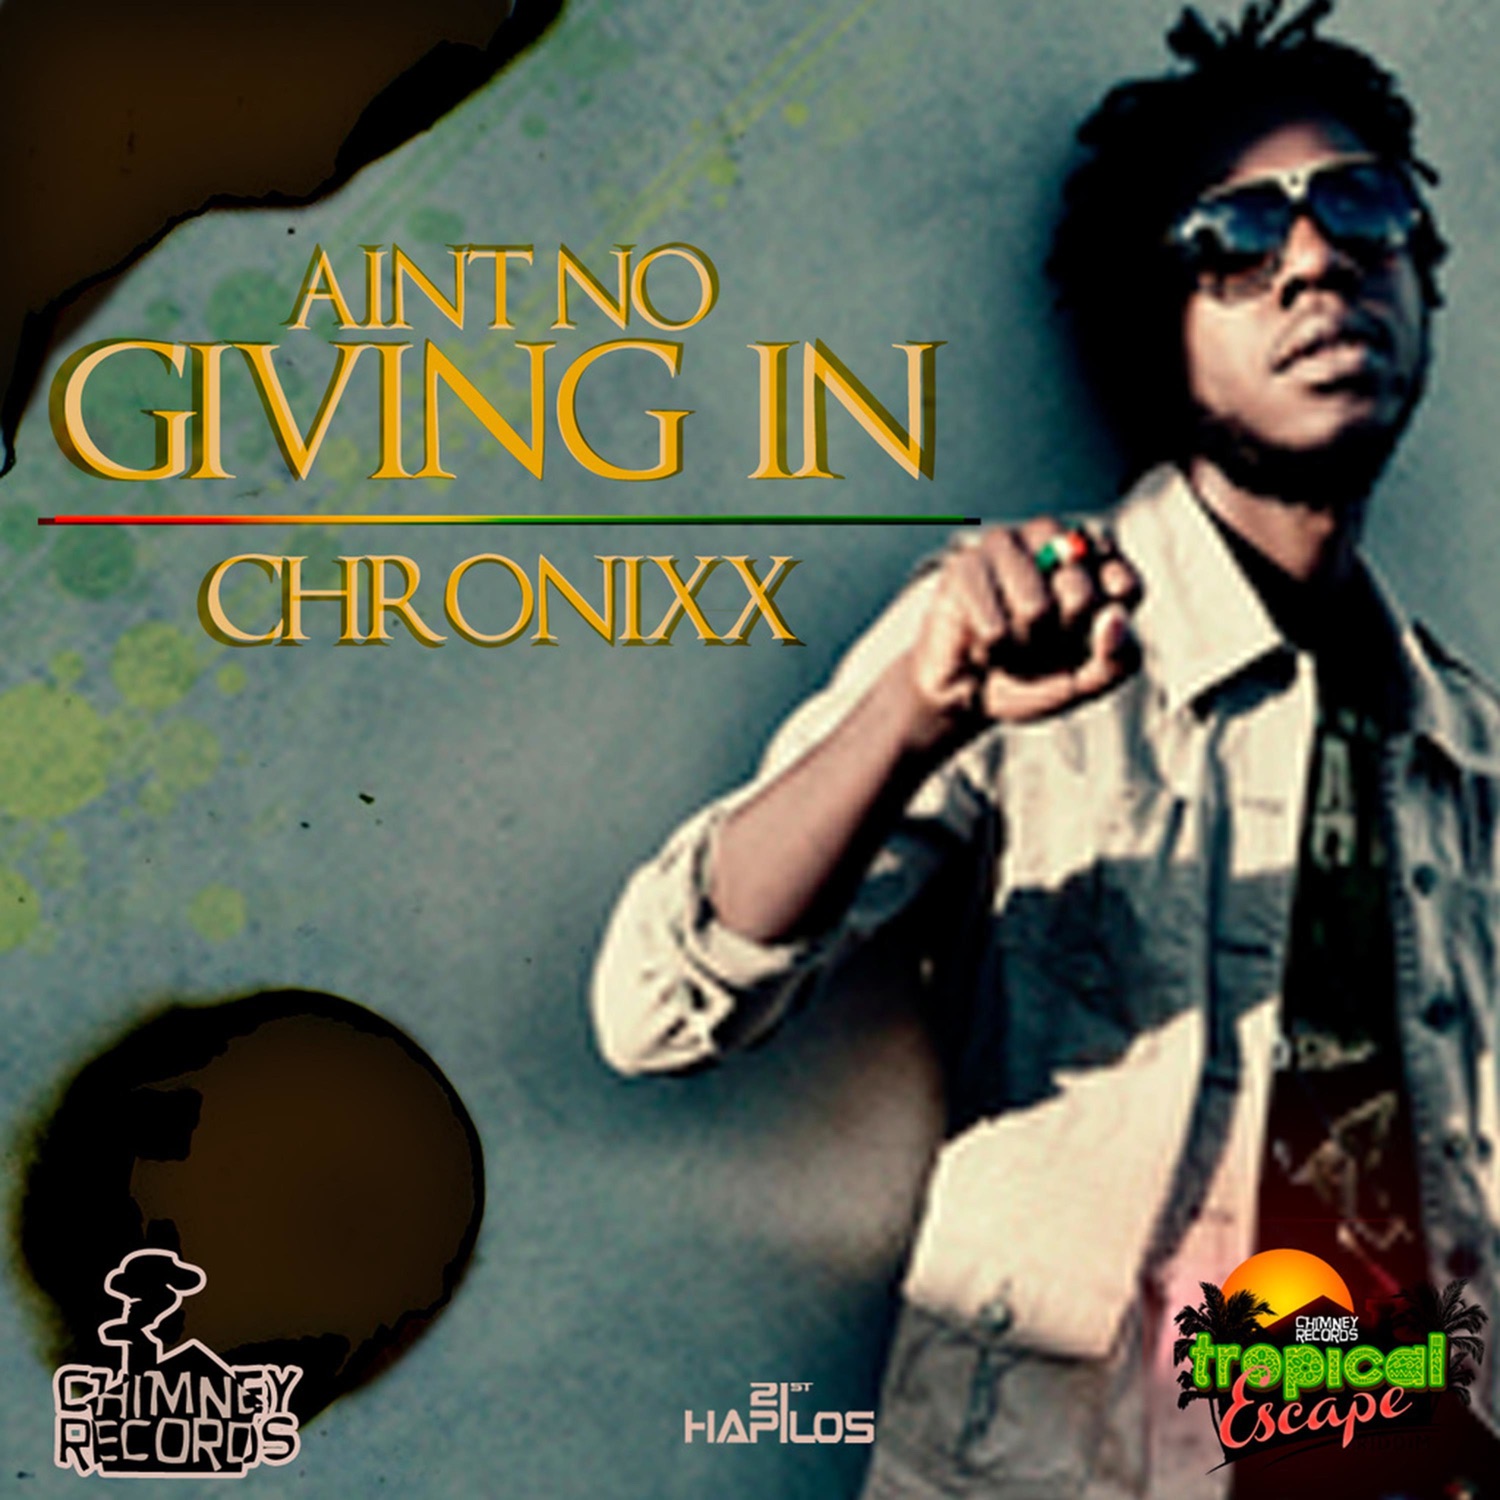 Art for Ain't No Giving In by Chronixx